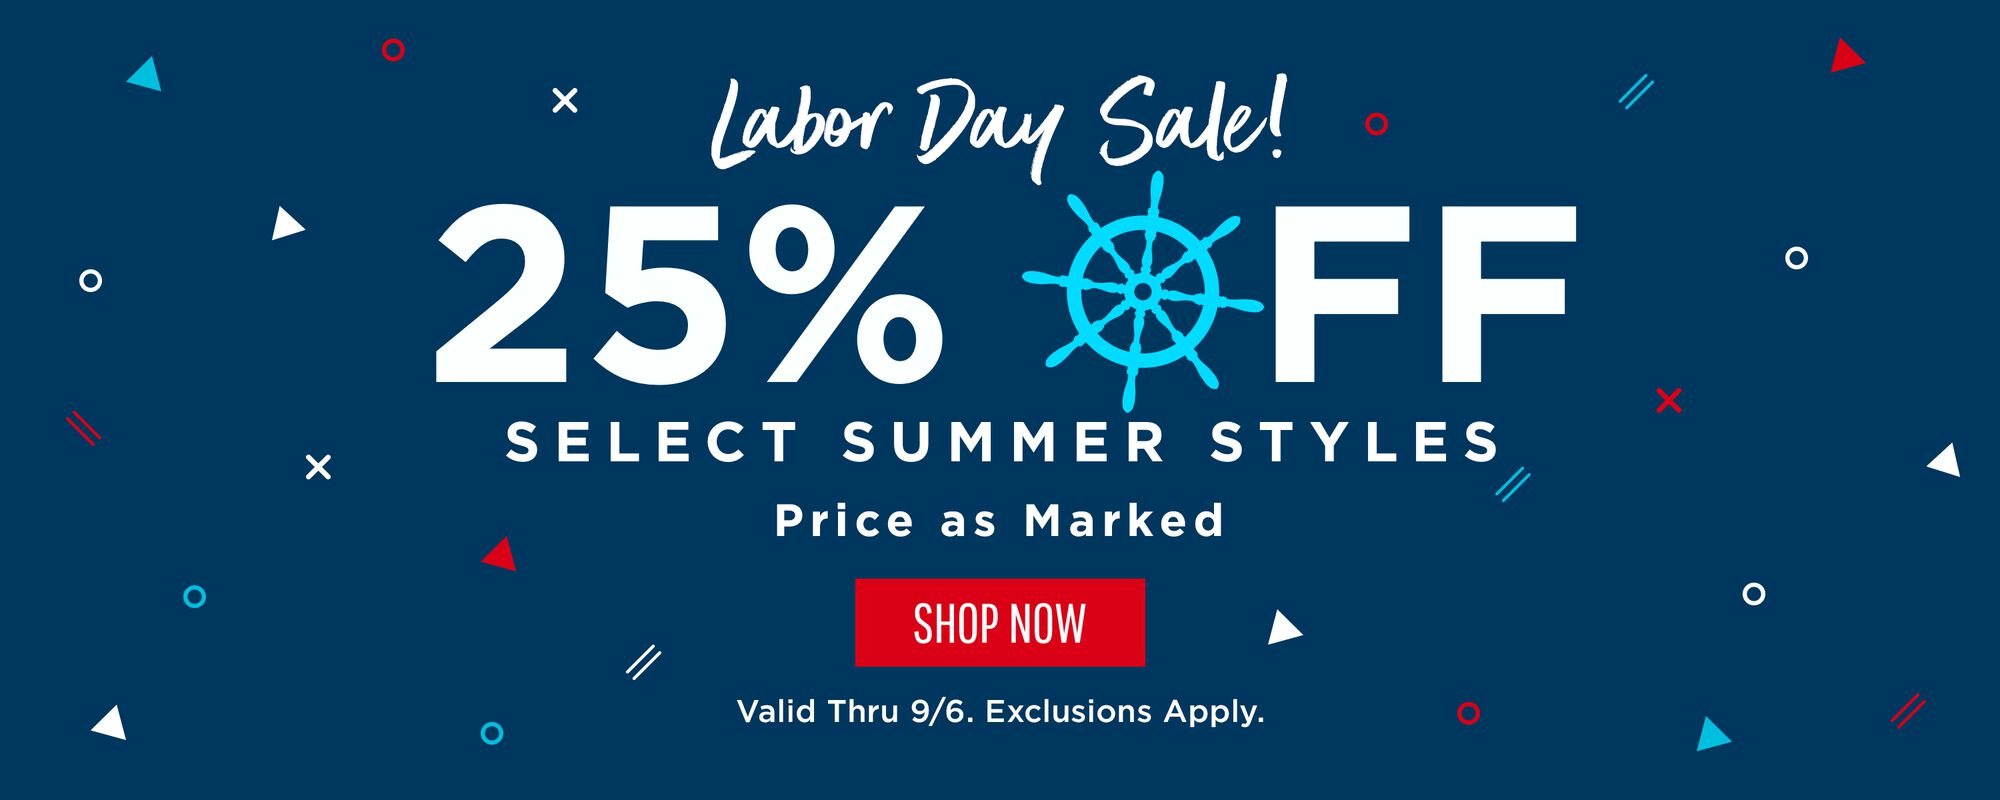 25% OFF Select Summer Styles - Price as Marked.  Valid Thru 9/6. Exclusions Apply.  [Shop Now]